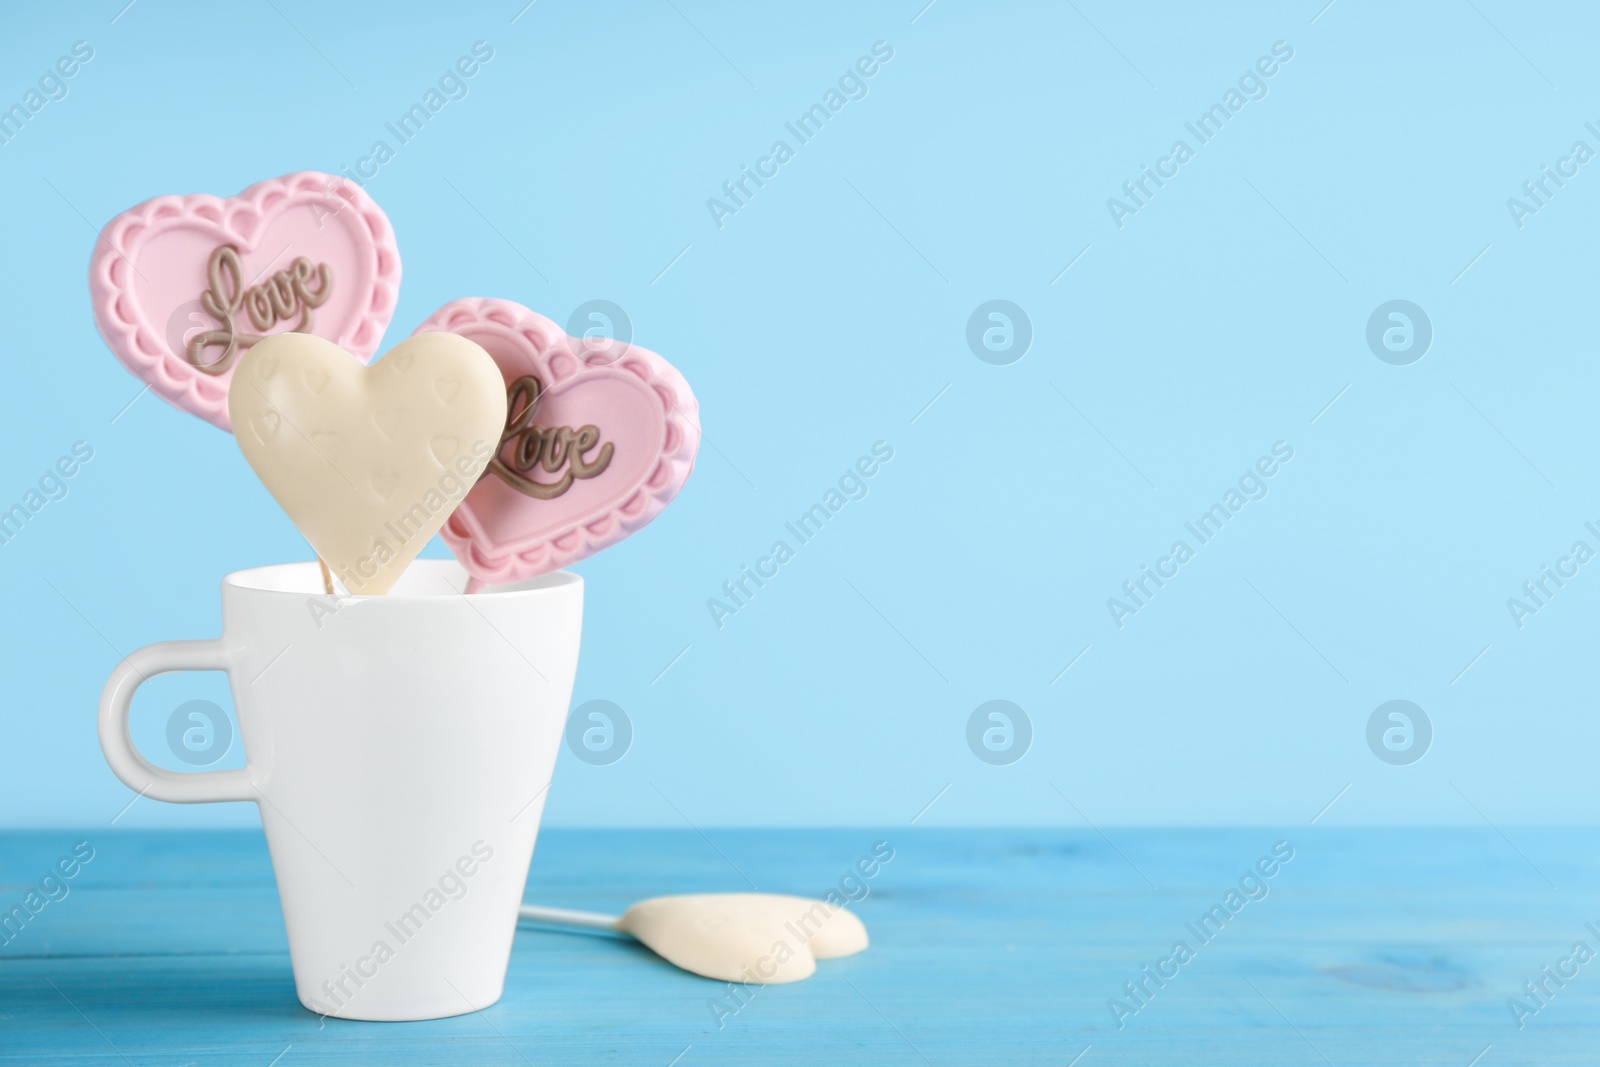 Photo of Heart shaped lollipops made of chocolate on light blue background, space for text